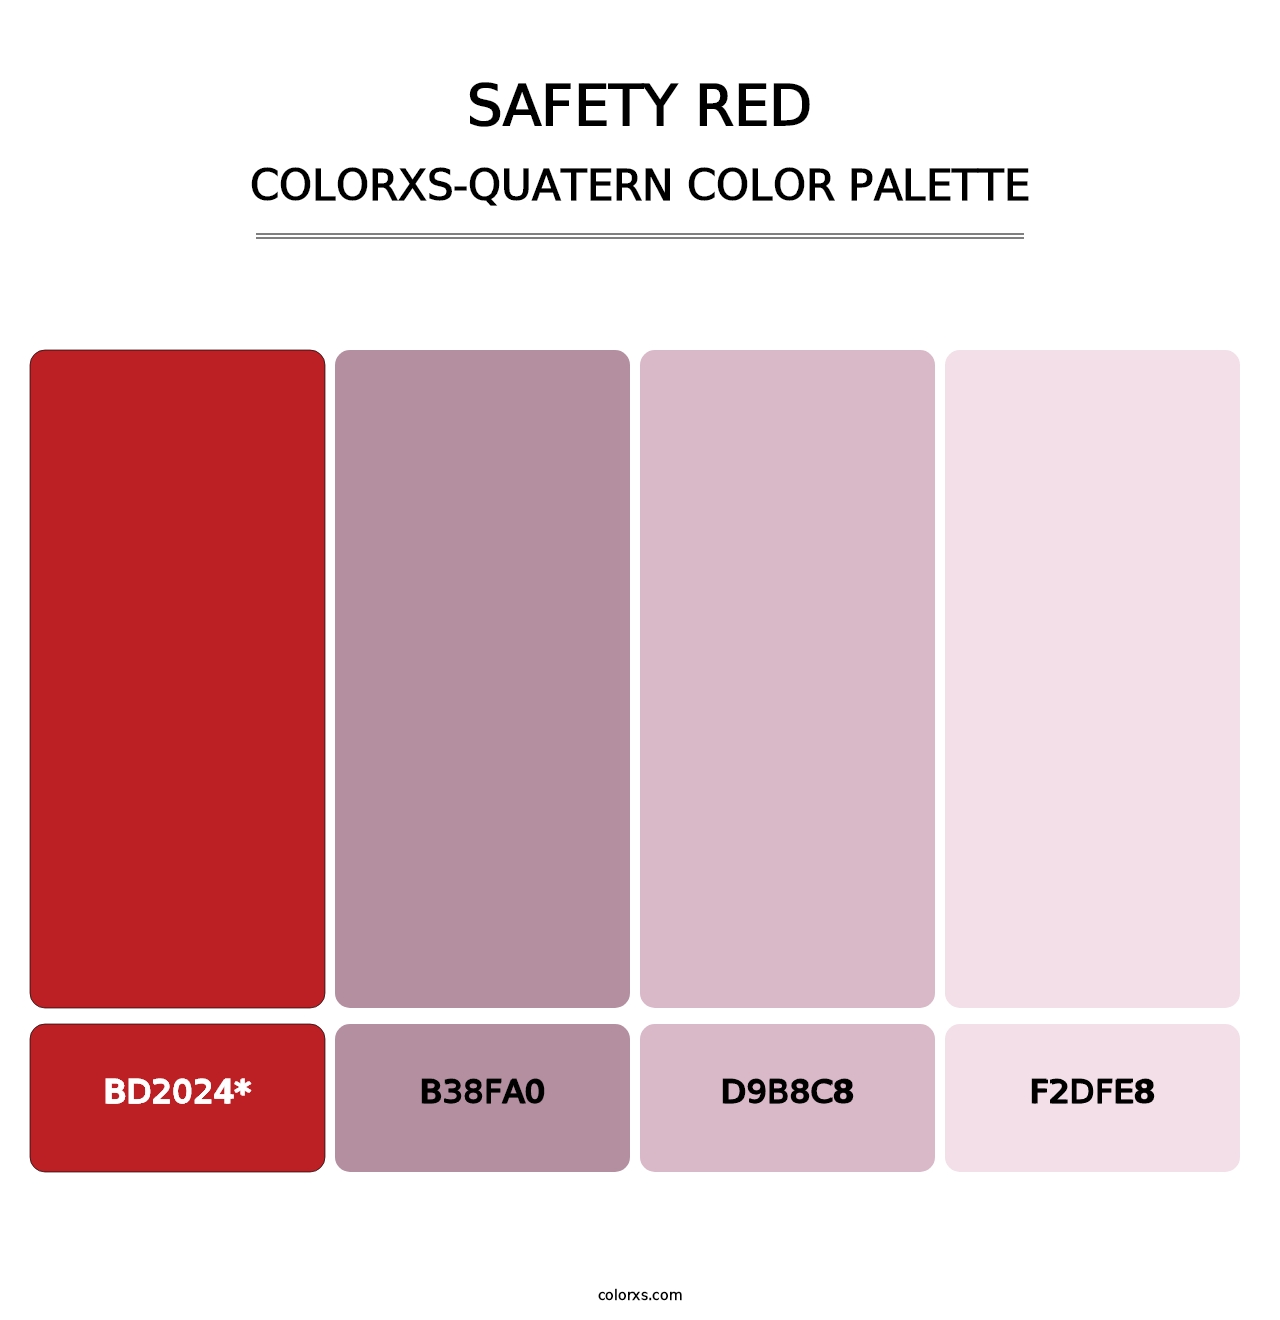 Safety Red - Colorxs Quatern Palette